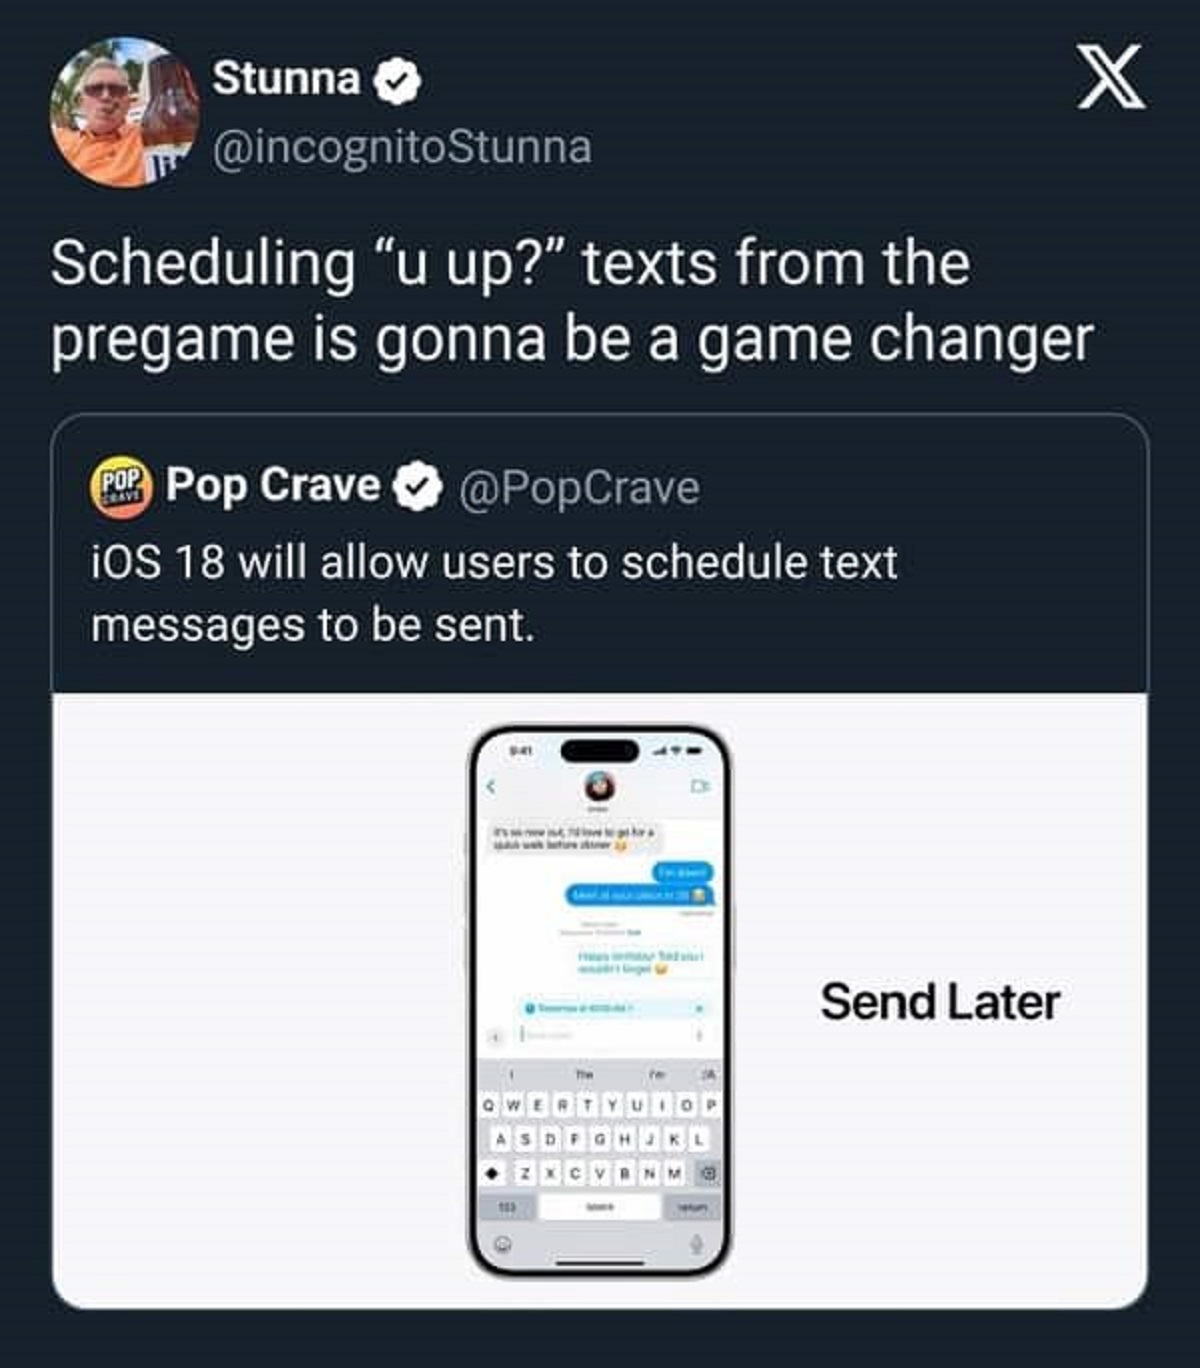 mobile phone - Stunna X Scheduling "u up?" texts from the pregame is gonna be a game changer Pp Pop Crave iOS 18 will allow users to schedule text messages to be sent. The Send Later